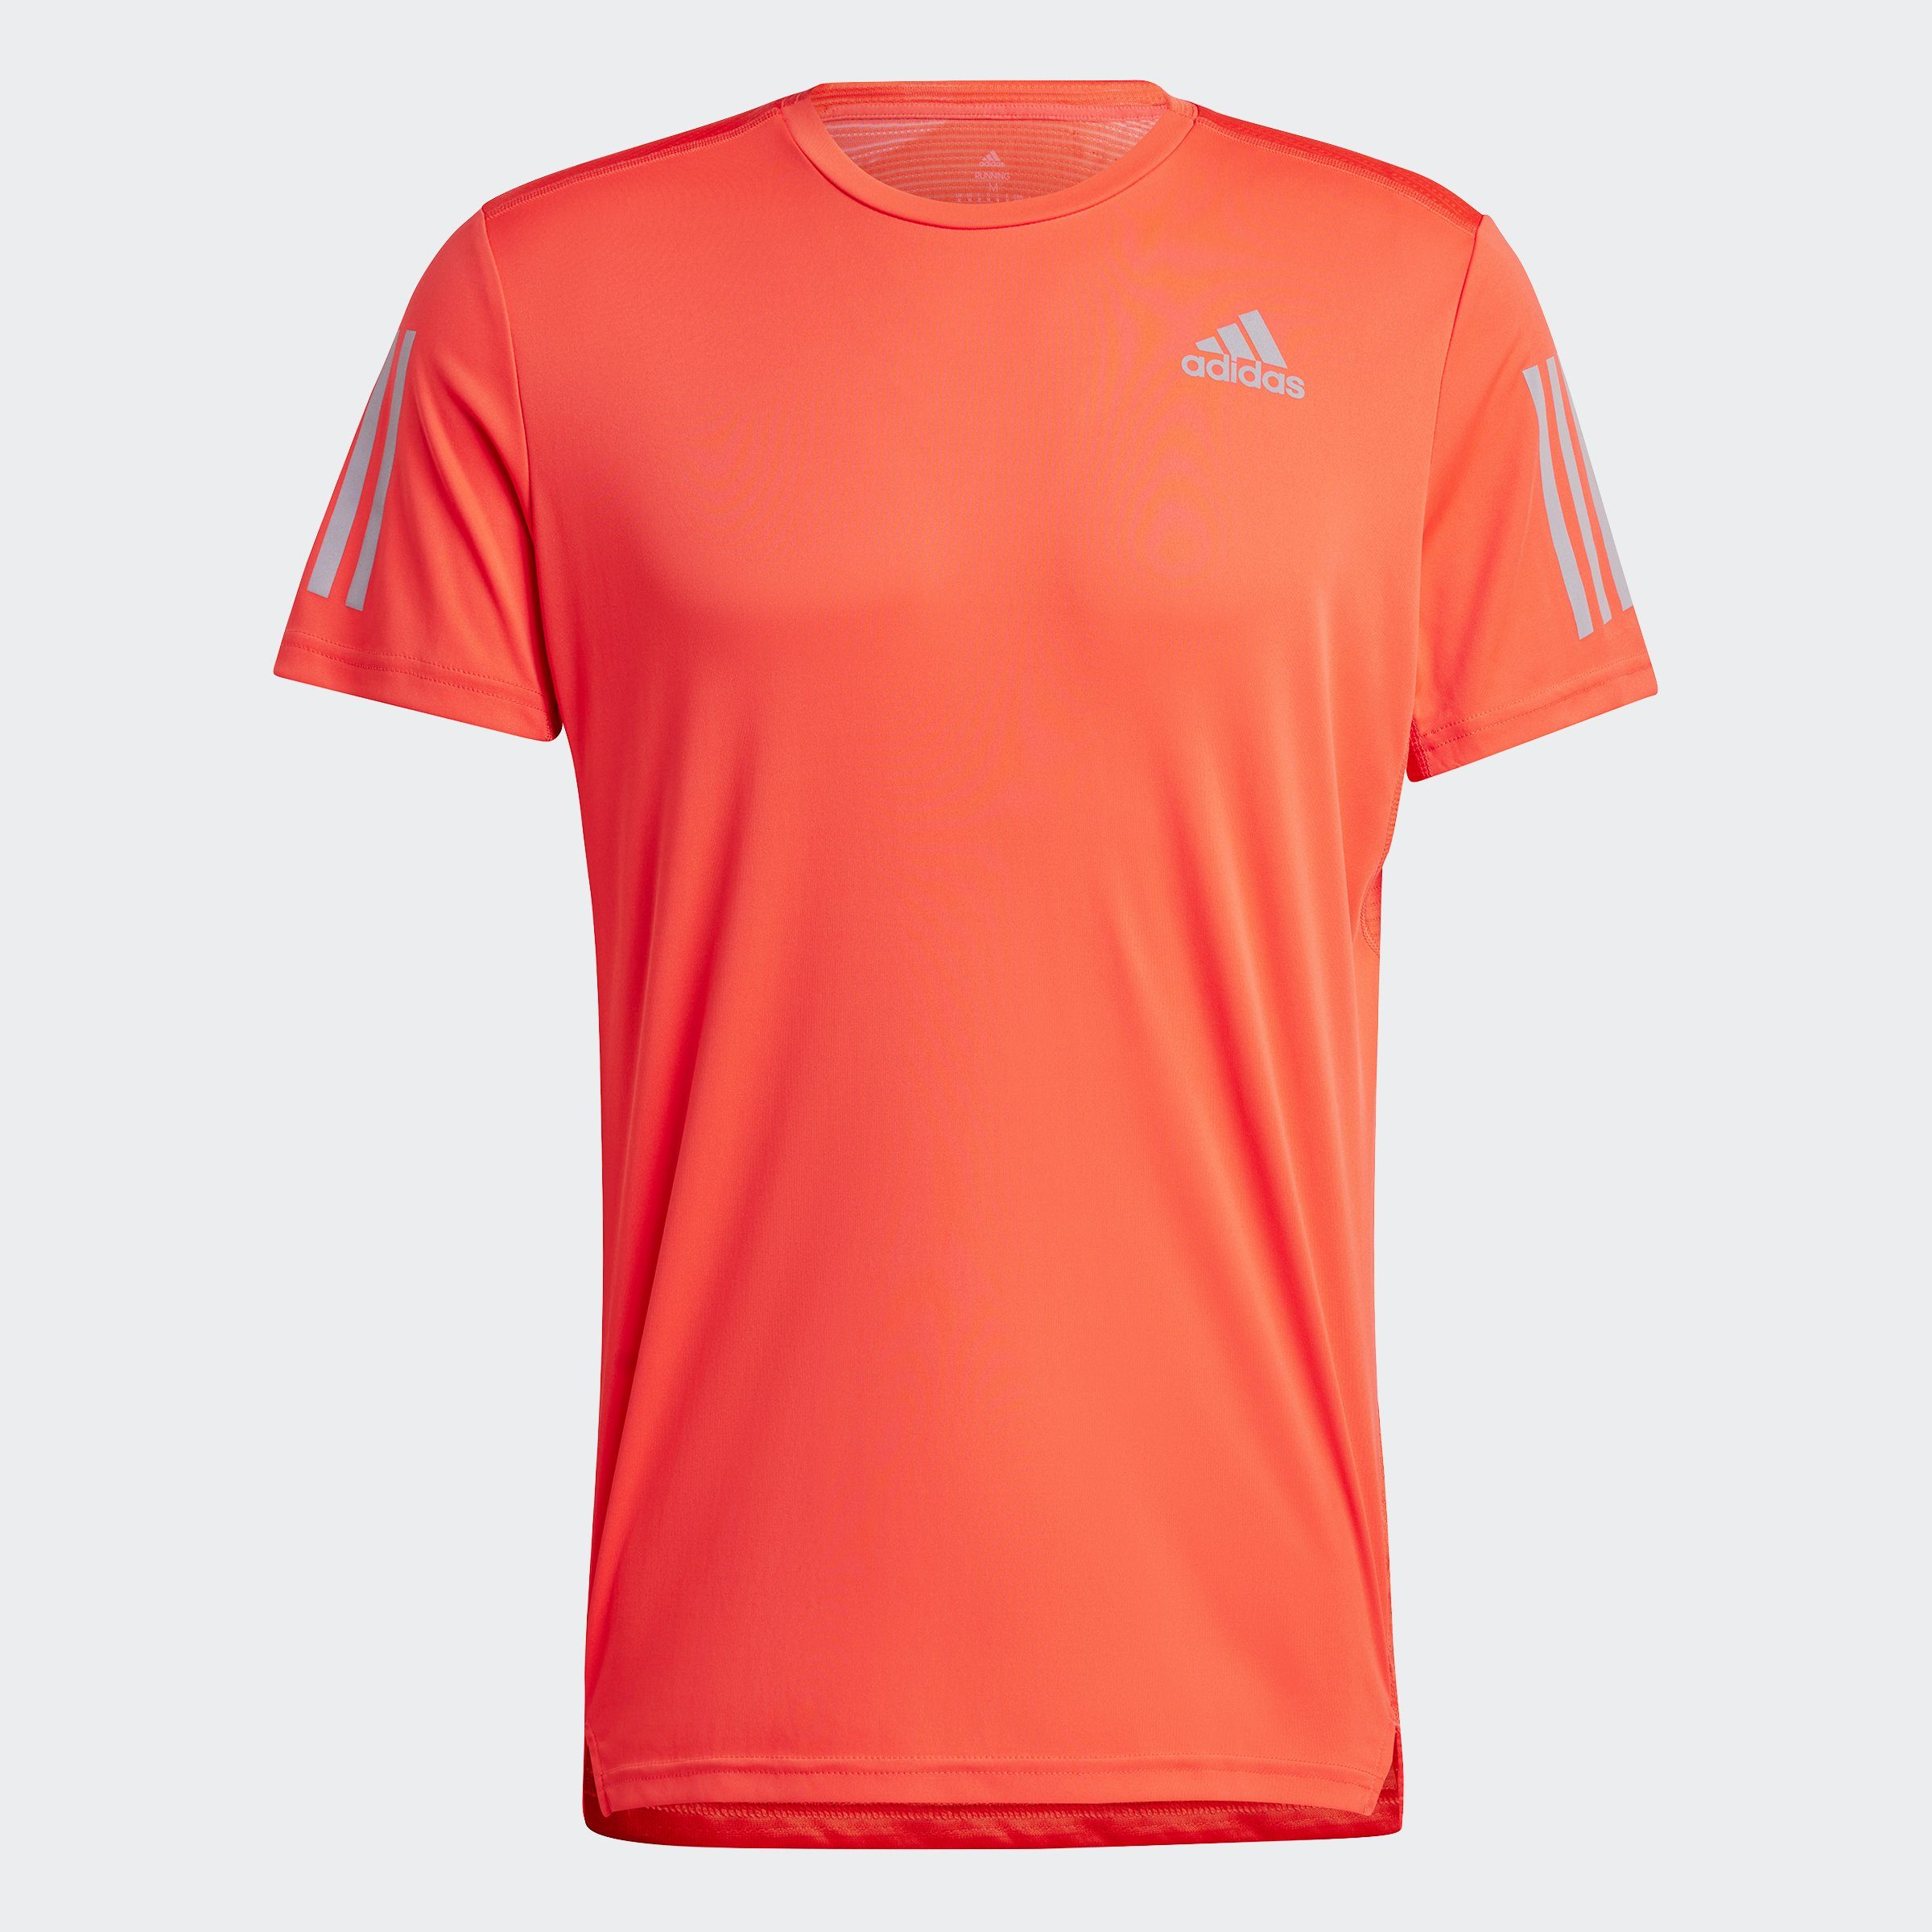 adidas Silver Bright / THE Laufshirt Reflective Performance OWN RUN Red